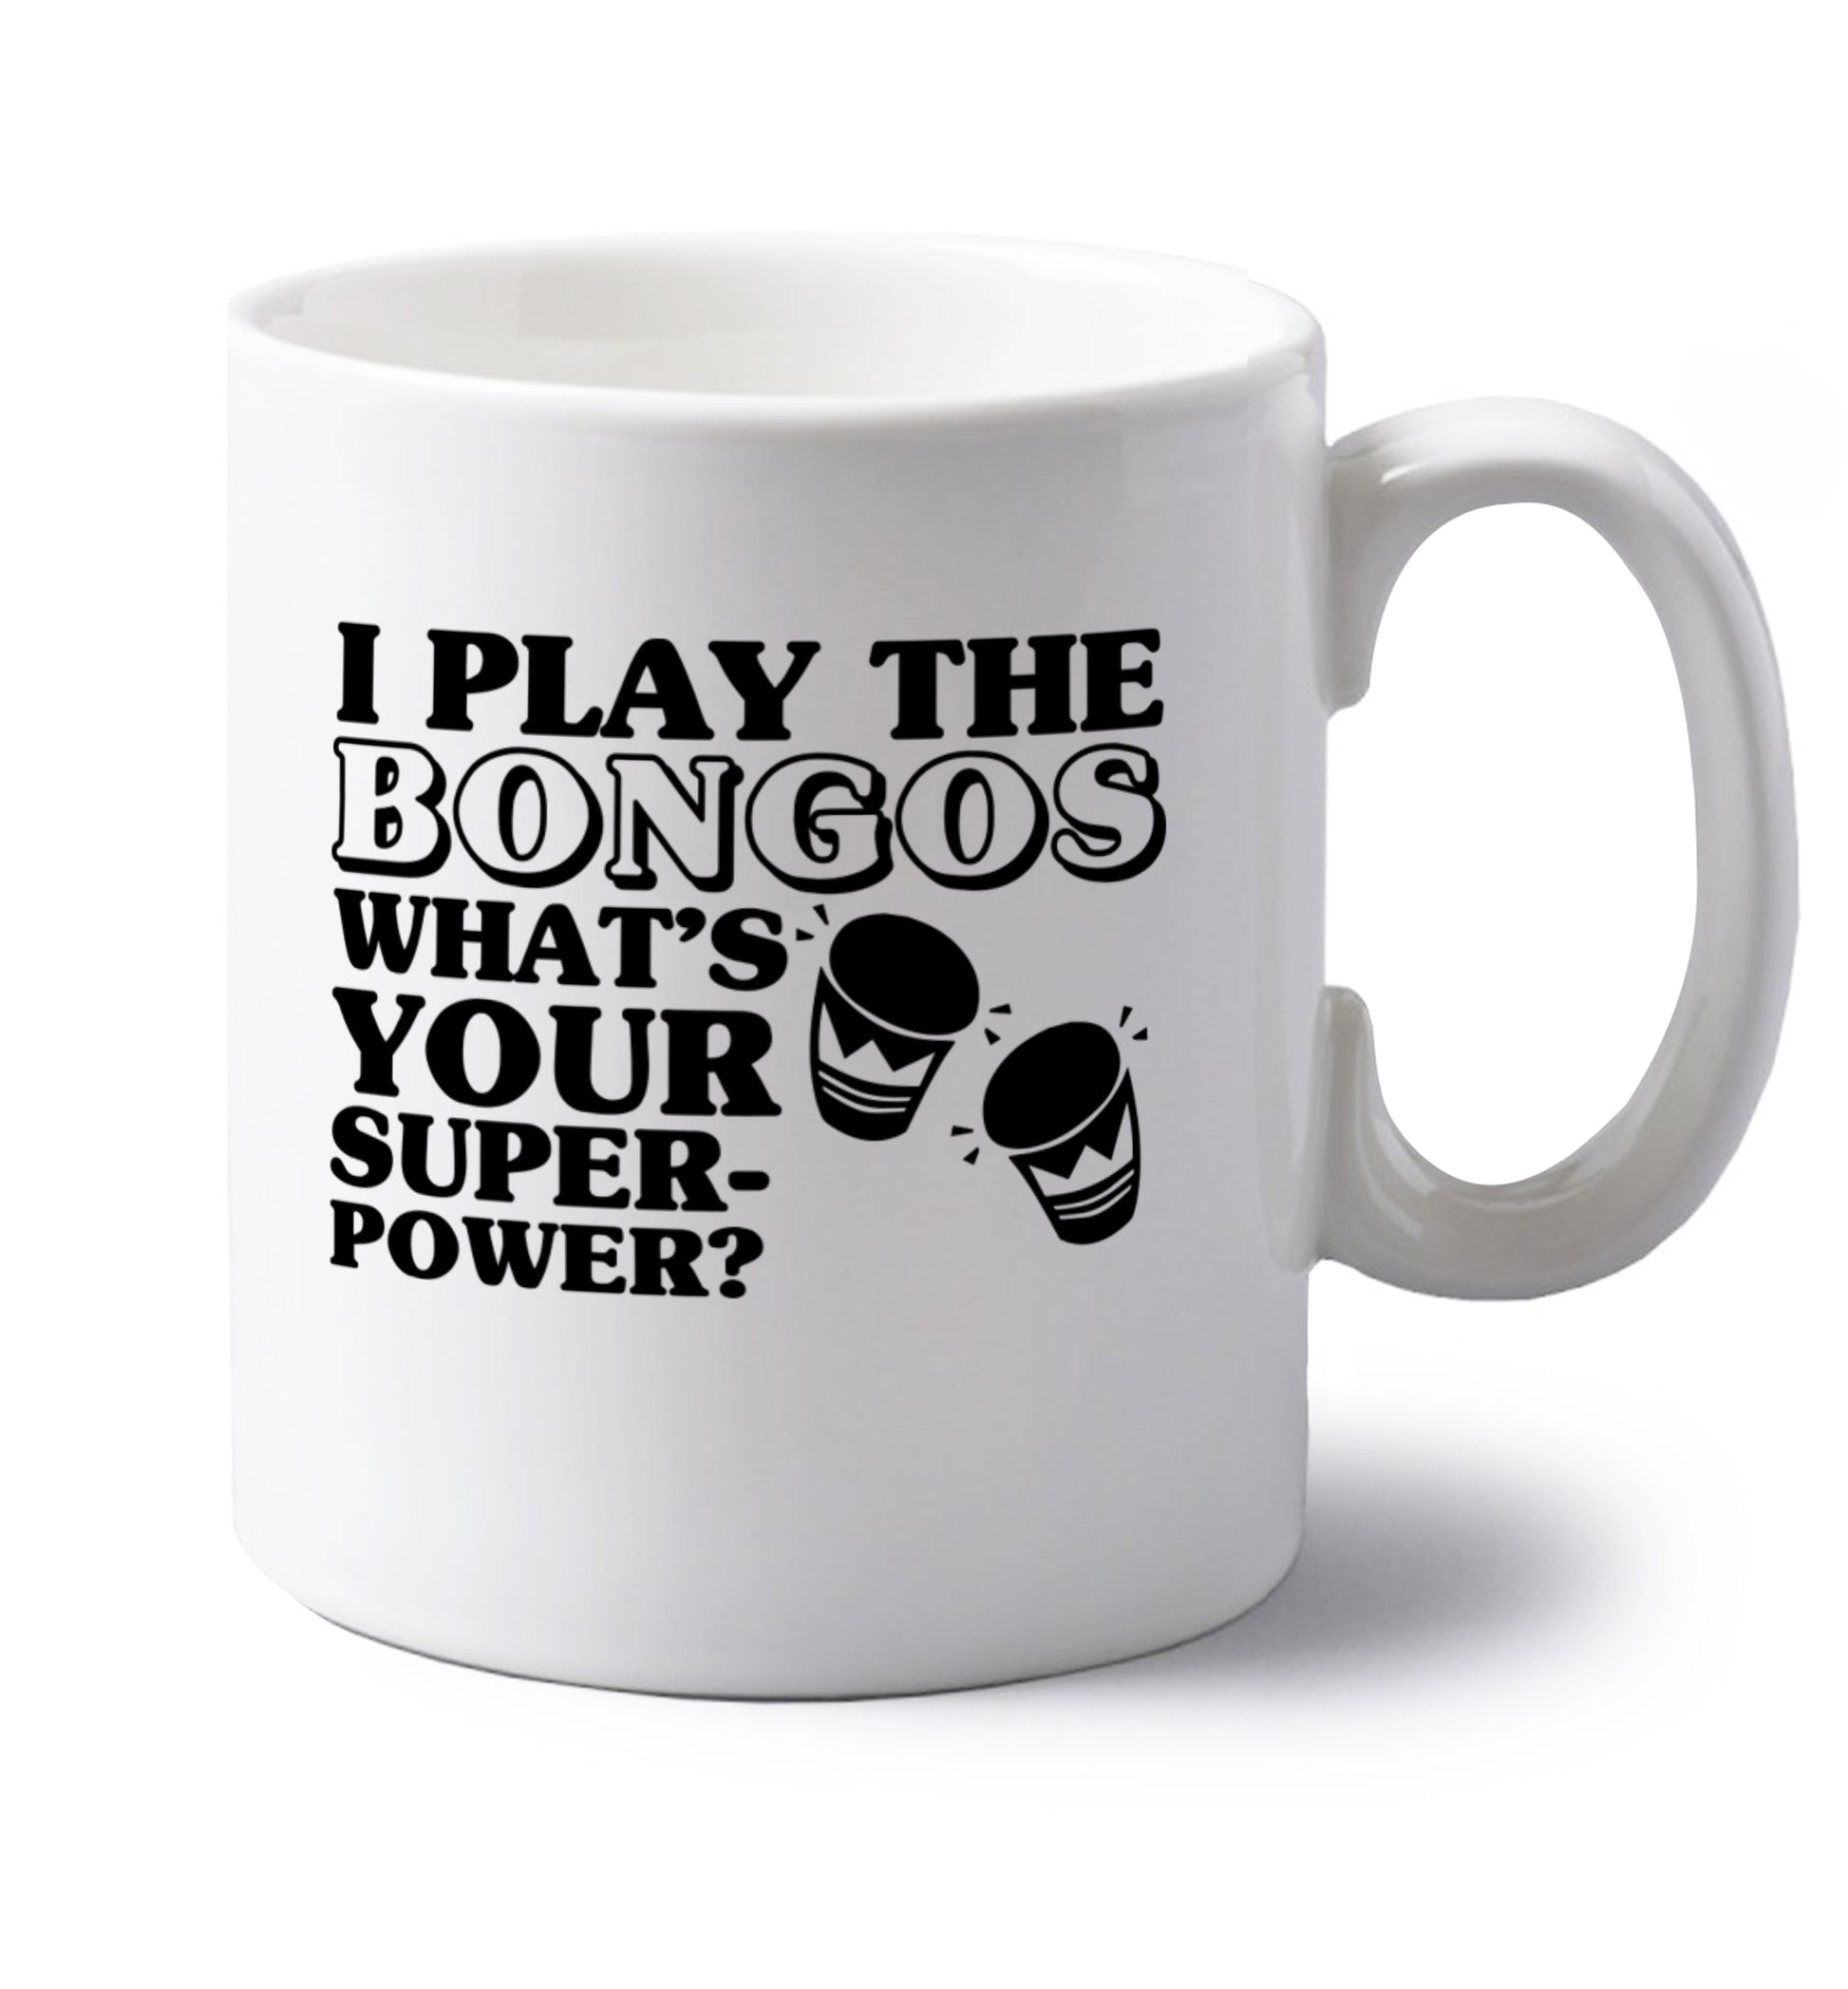 I play the bongos what's your superpower? left handed white ceramic mug 